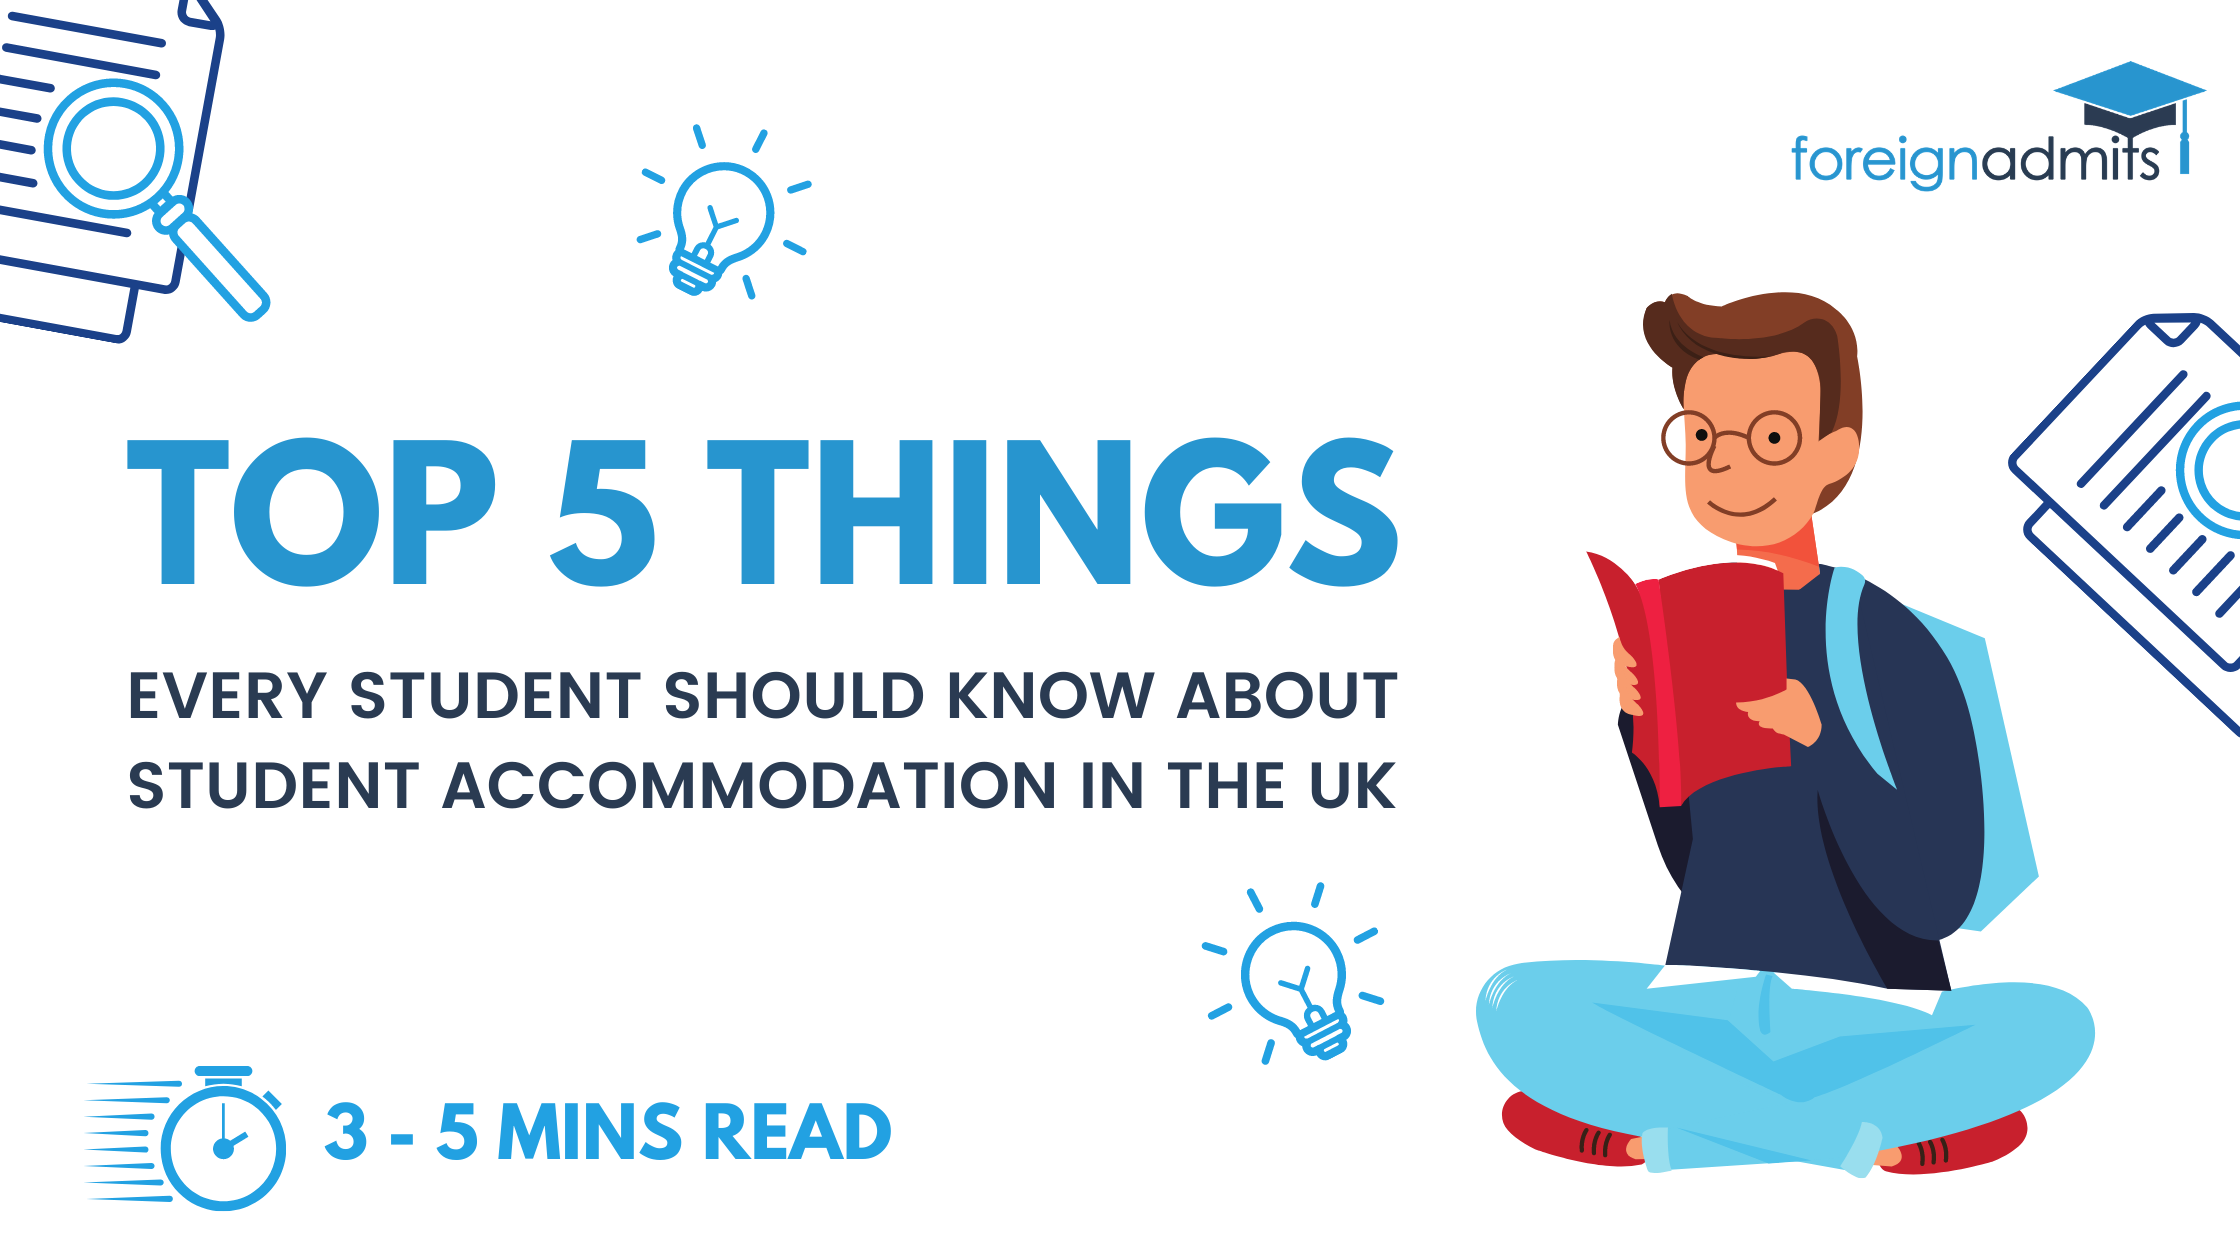 Top 5 Things Every Student Should Know About Student Accommodation In The UK